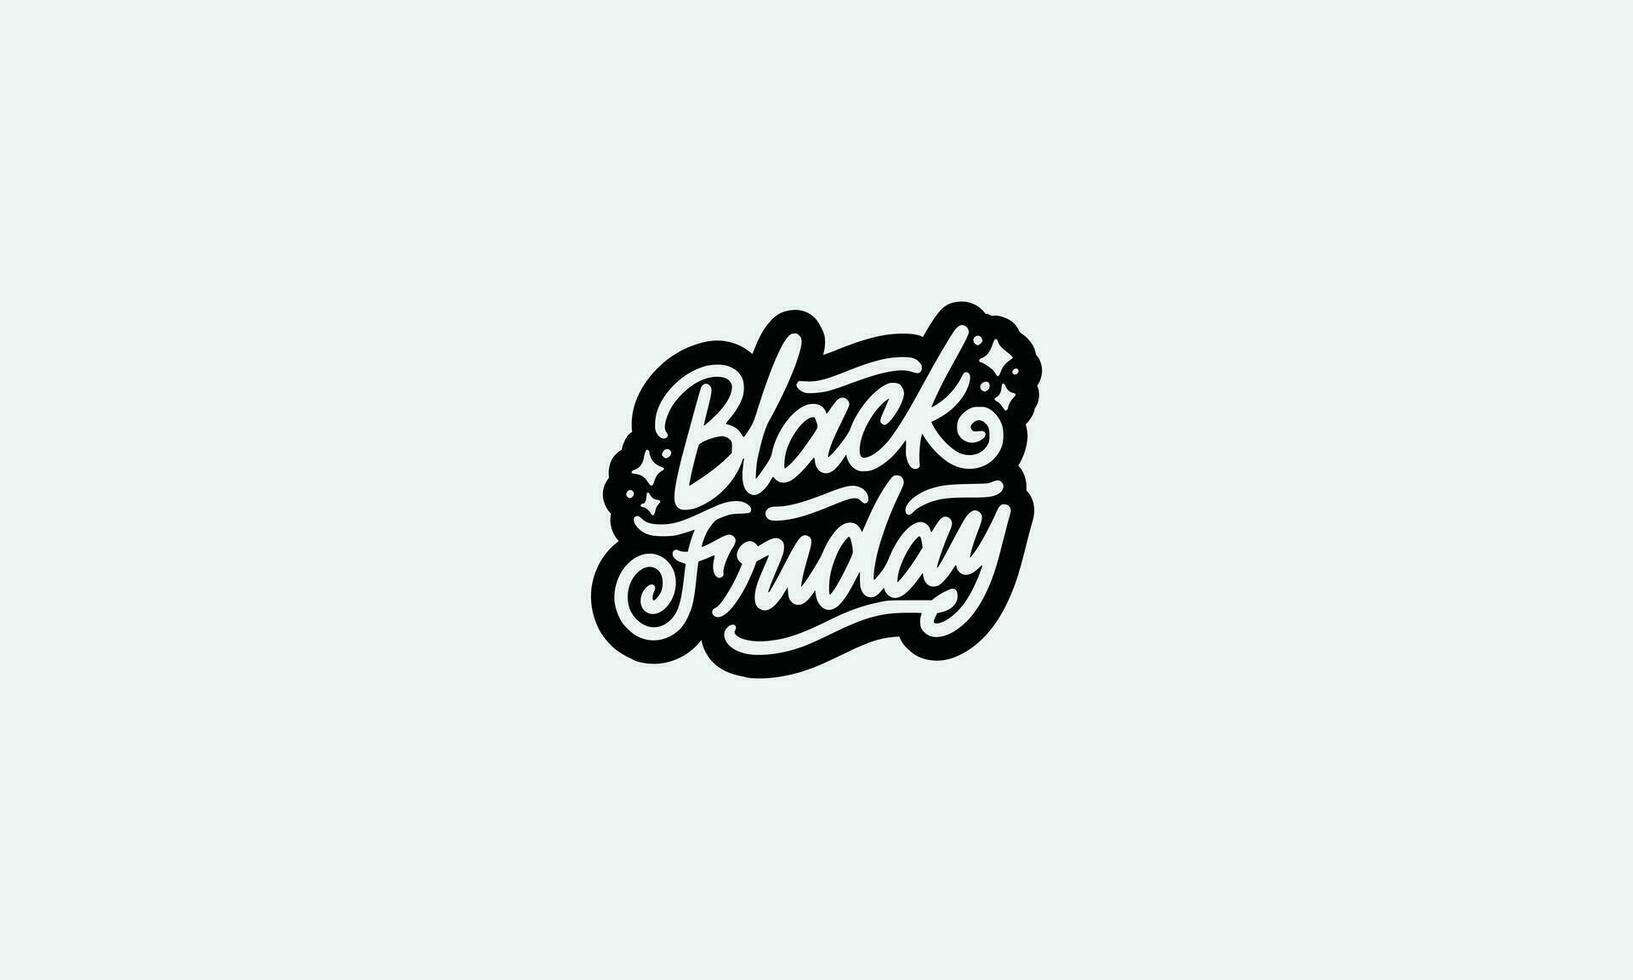 Black Friday sale and discounts vector